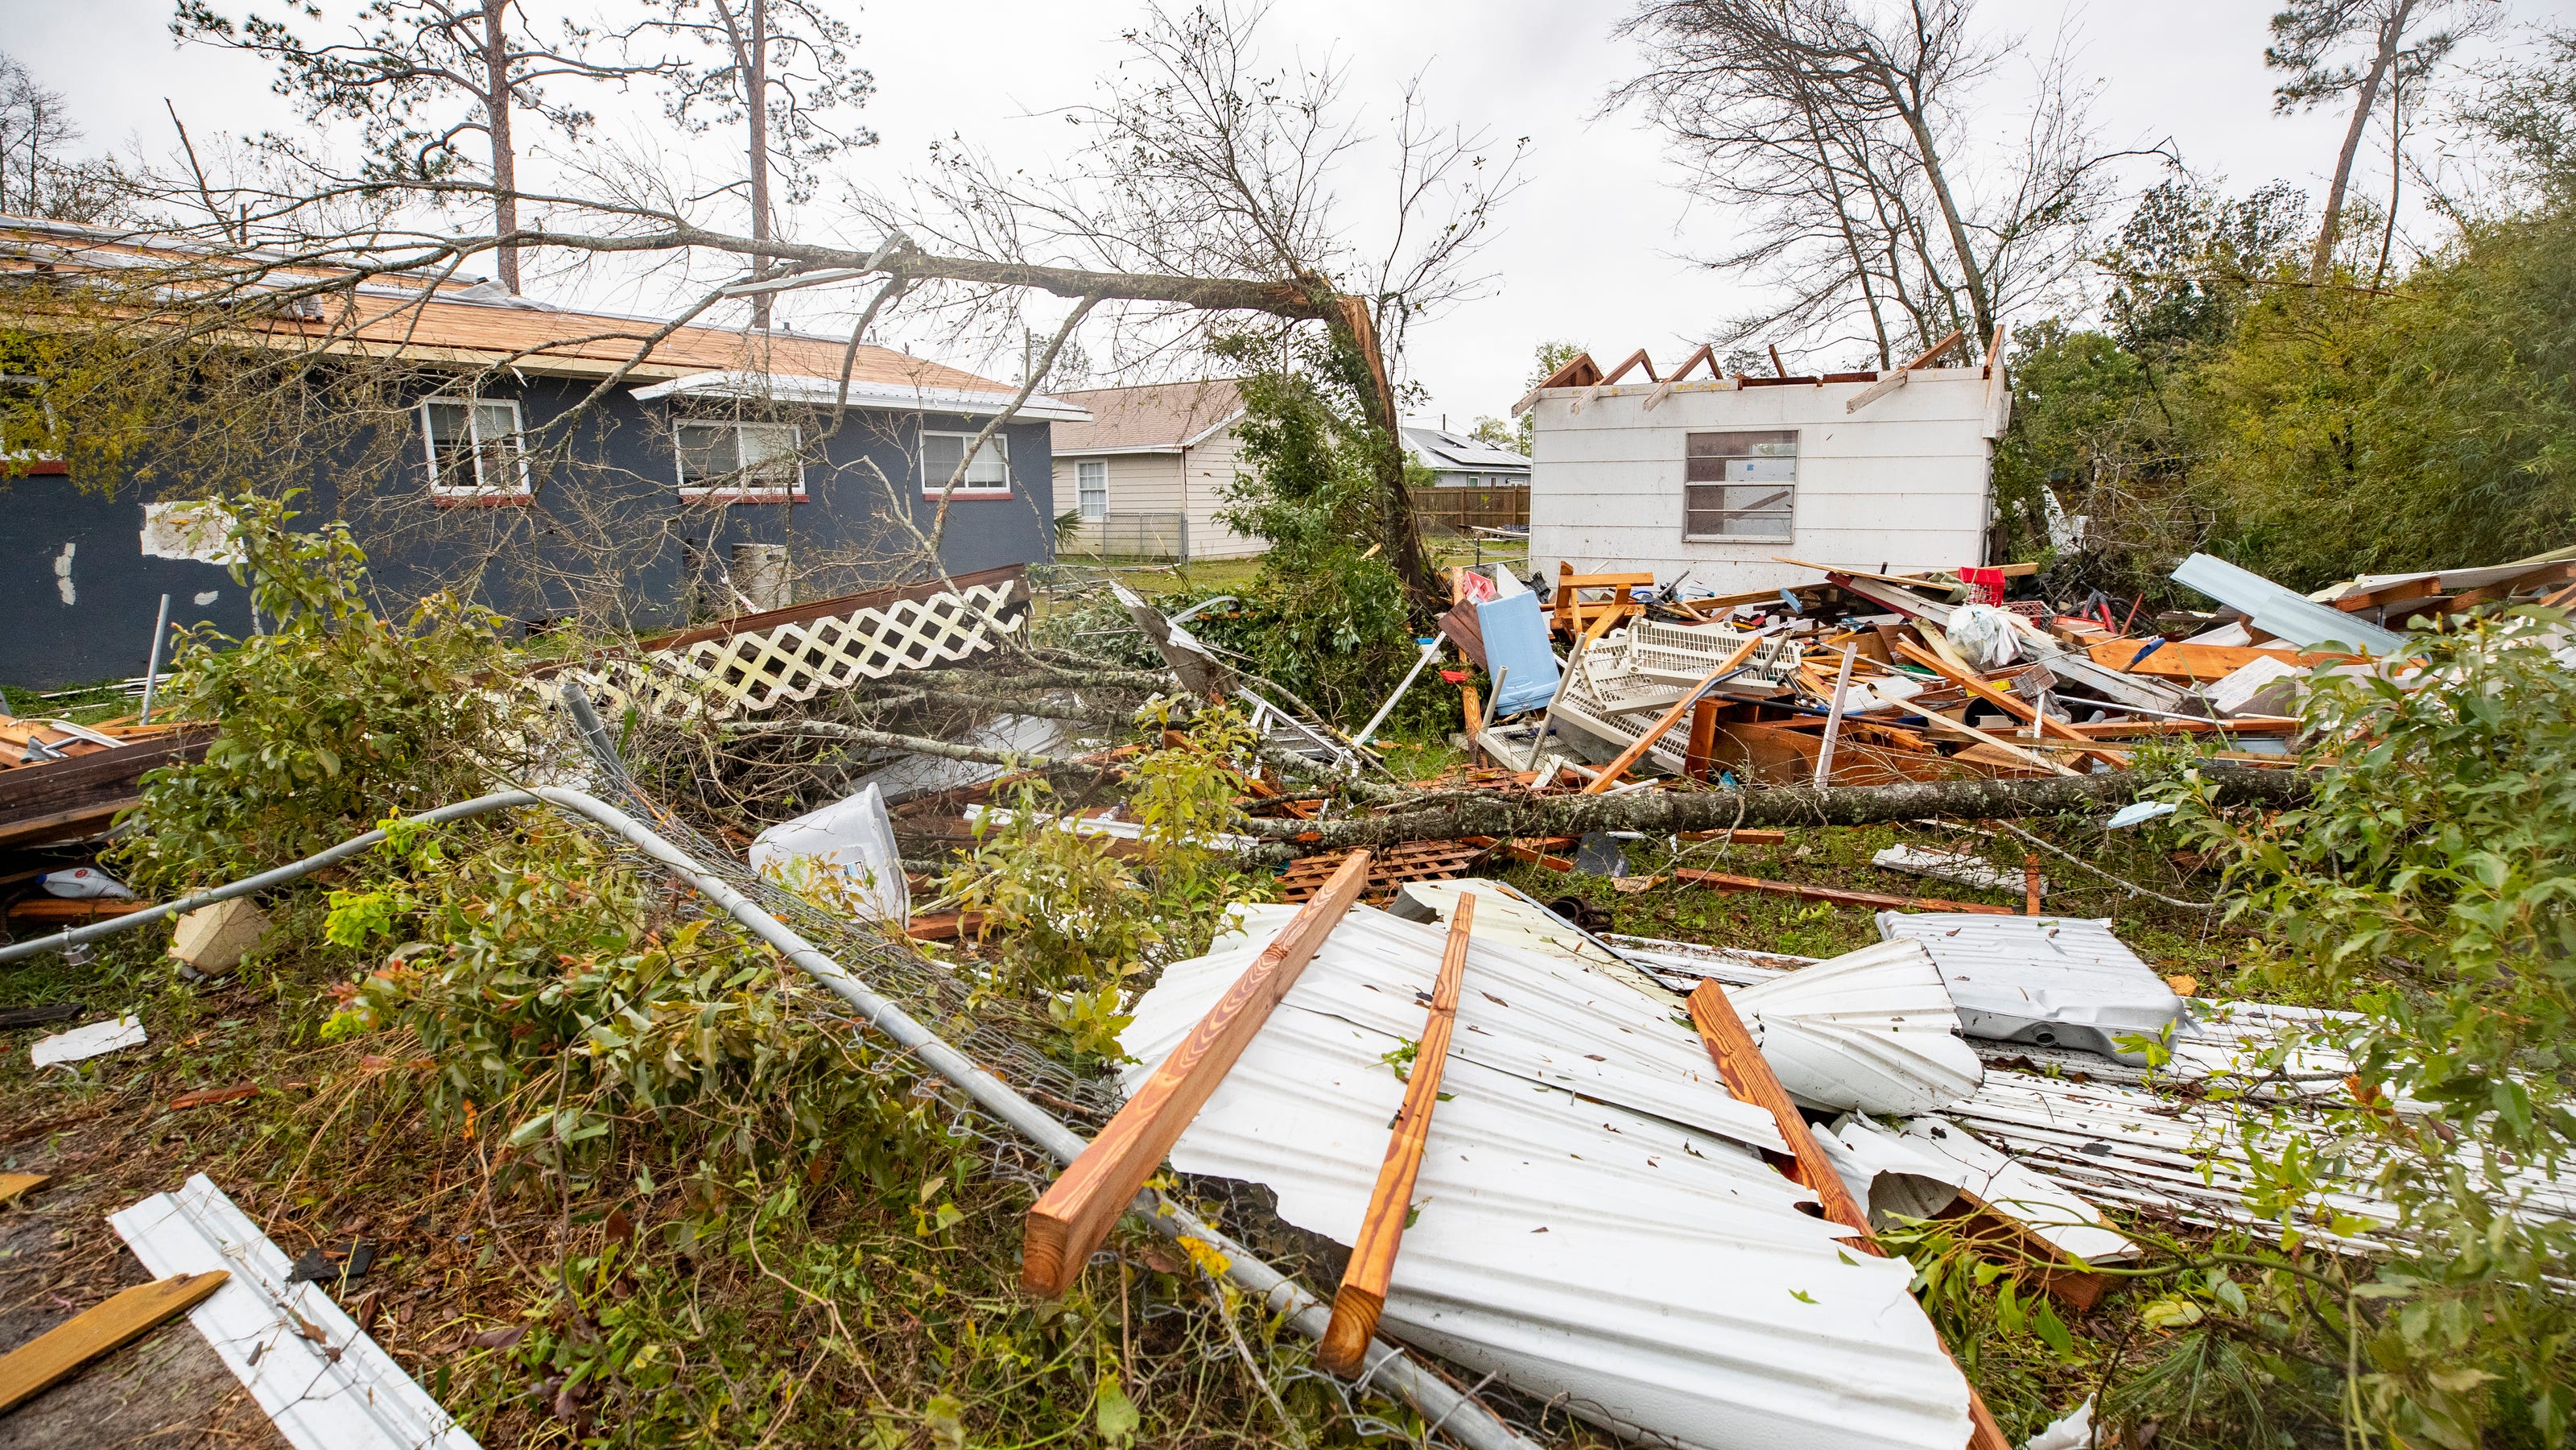 Panama City, FL tornado ripped through 16 homes in St. Andrews area